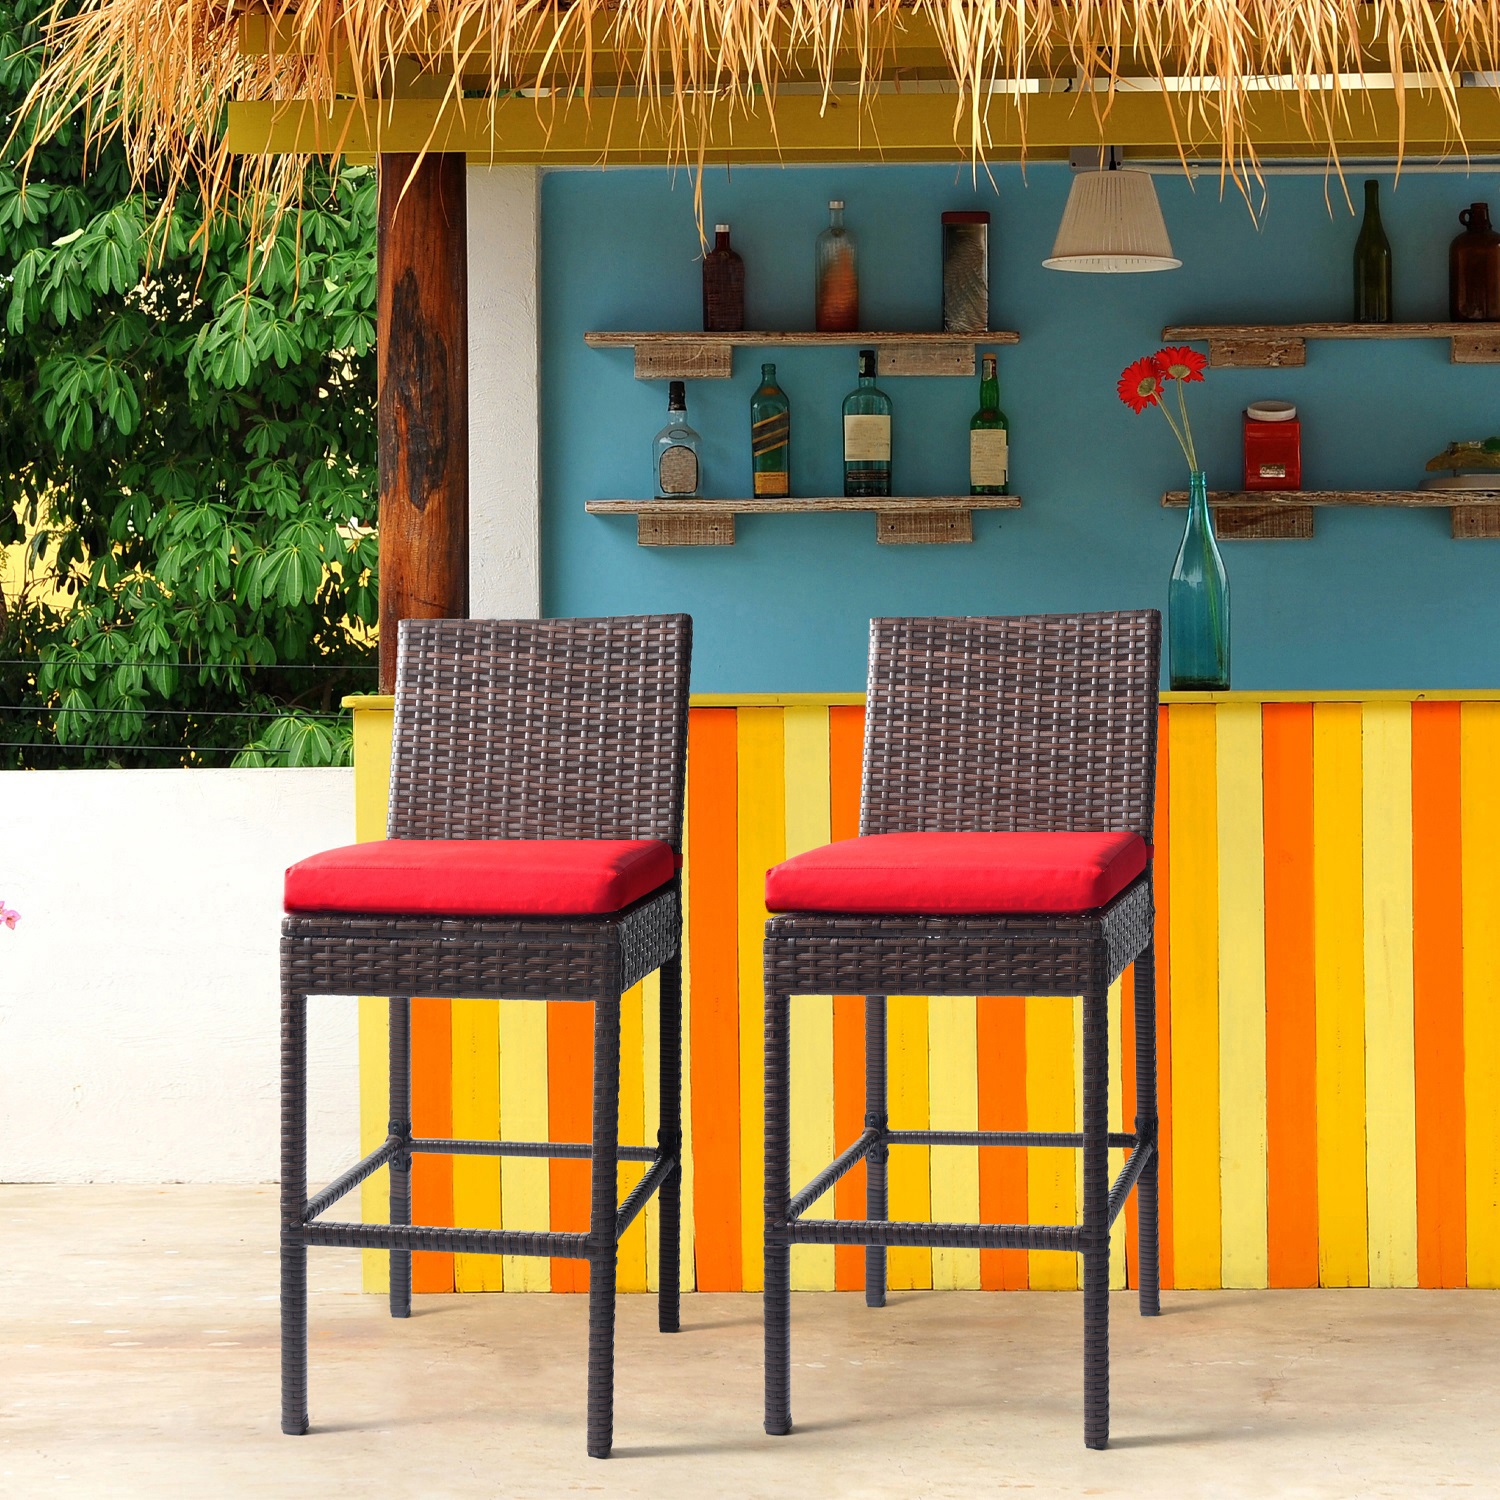 Patio Stools & Bar Chairs Outdoor Wicker Bar Stools Set of 2 Counter Height Bar Stools Patio Chairs Bar Height with Footrest Armless Cushion Red All Weather Rattan for Garden Pool Lawn Backyard - image 2 of 7